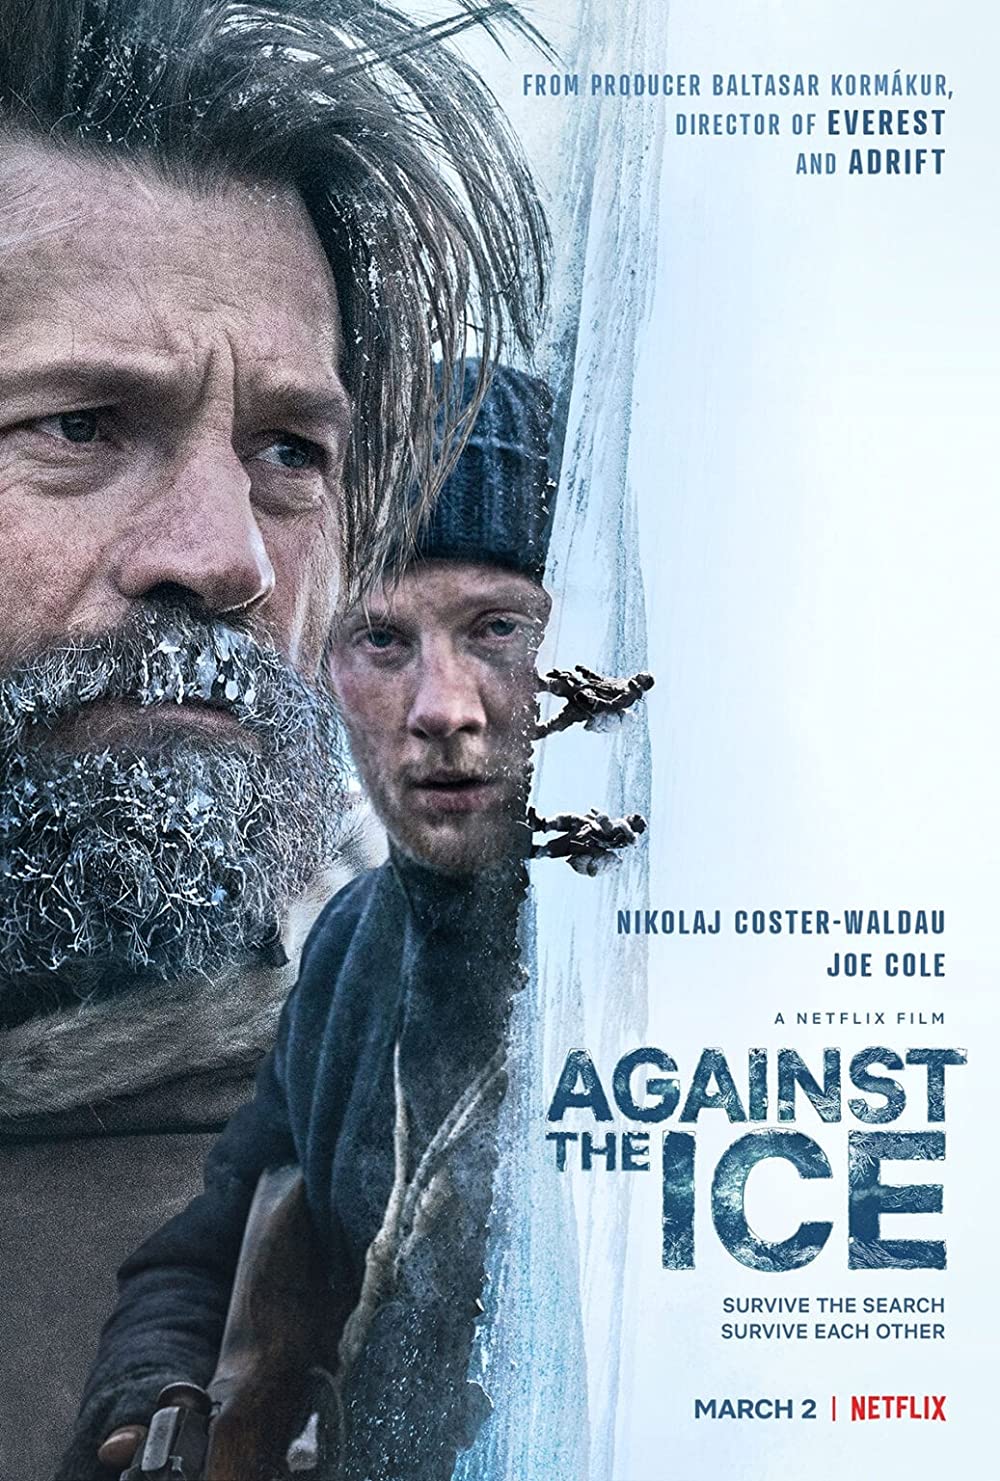 Is “Against The Ice” on Netflix